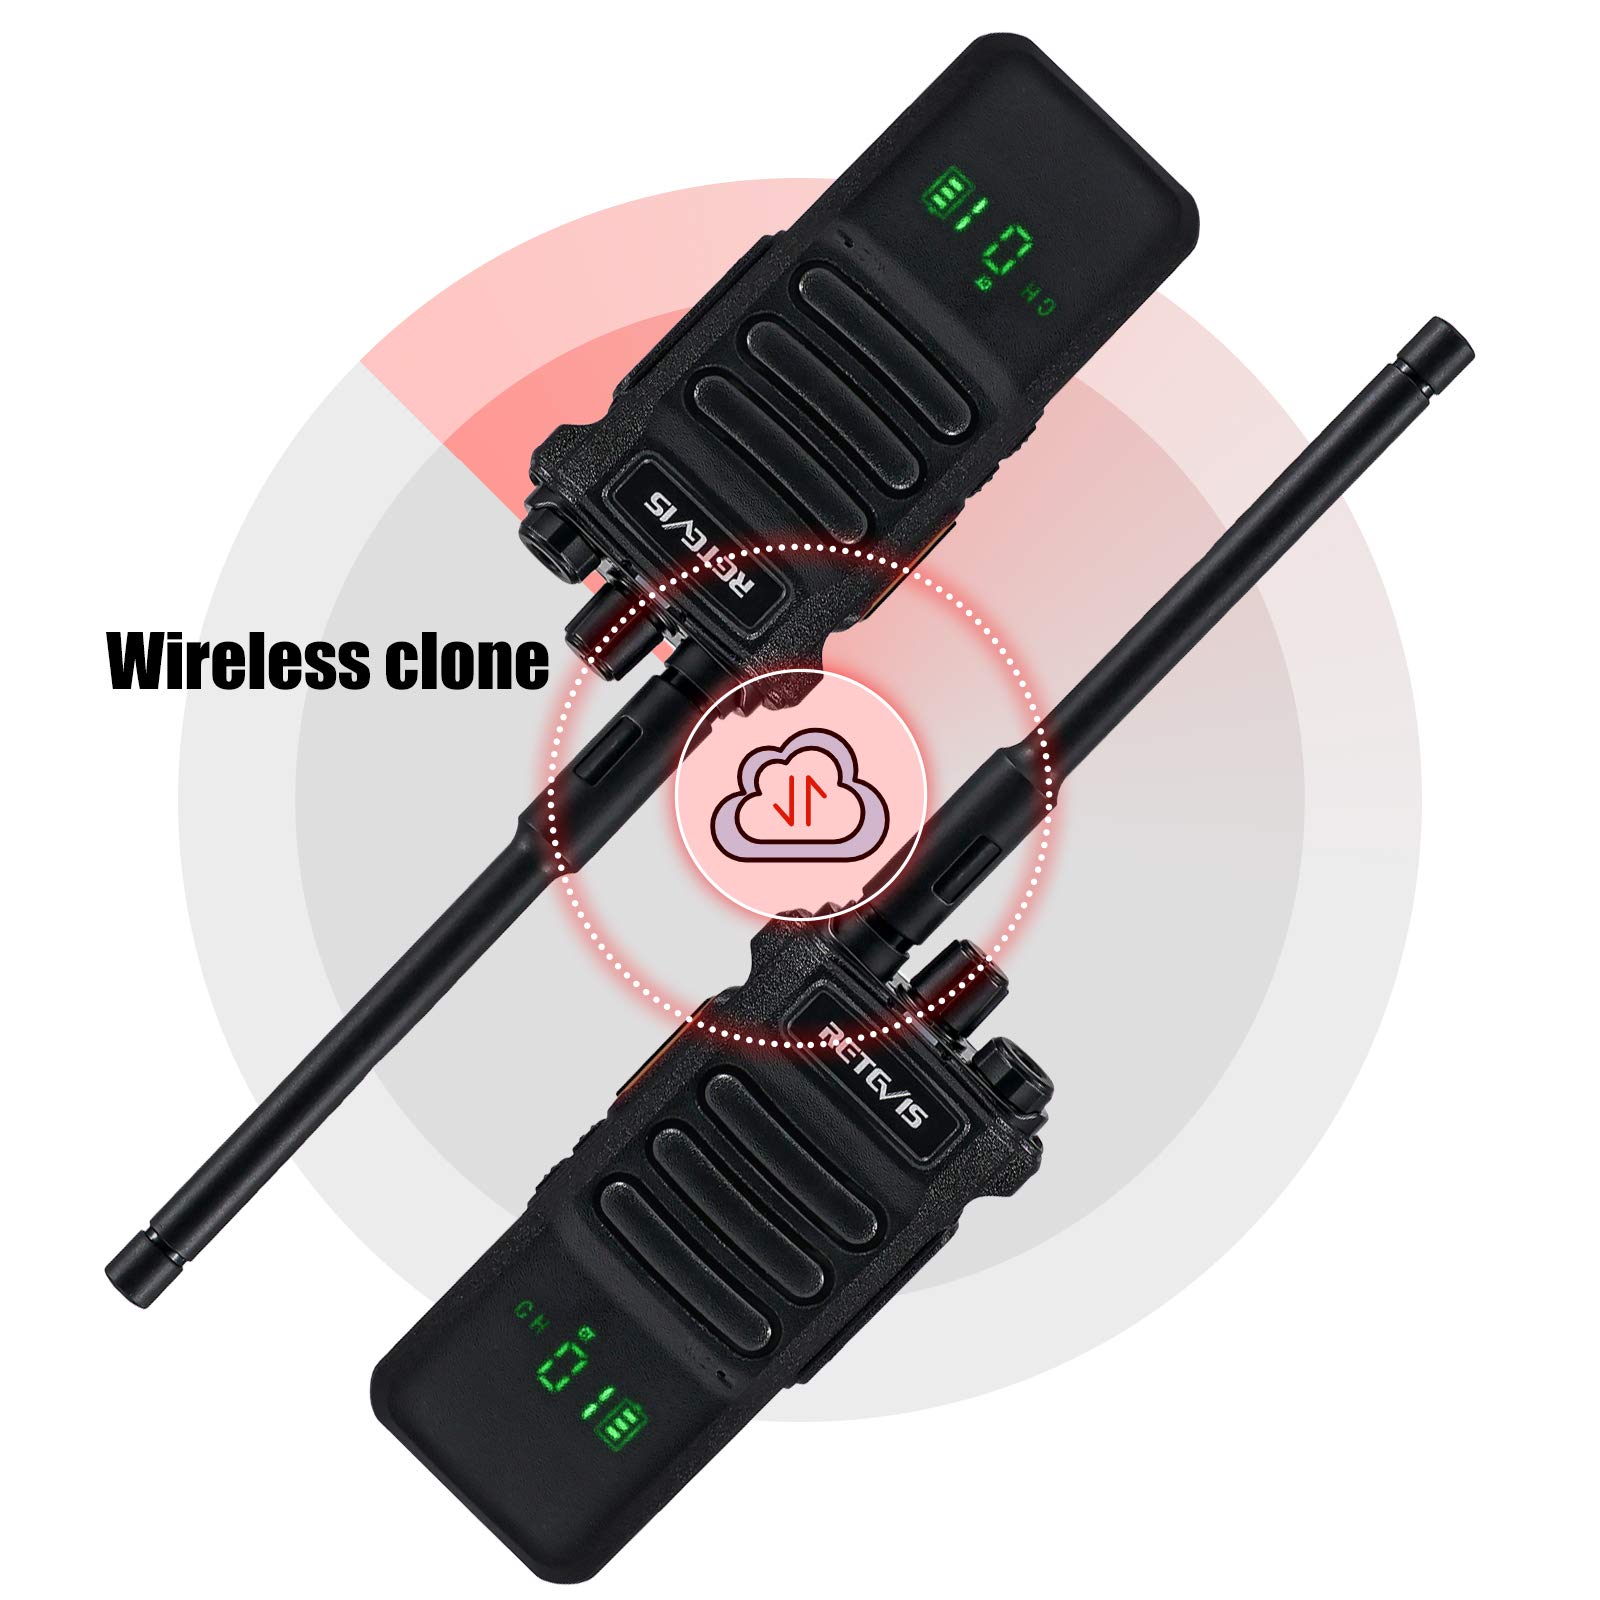 Retevis RT86 Two Way Radios Long Range,High Power Walkie Talkies with 2600mAh Rechargeable,Remote Alarm,Flashlight, Handheld 2 Way Radio for Off-Roading Overland Farm Hunting(2 Pack)